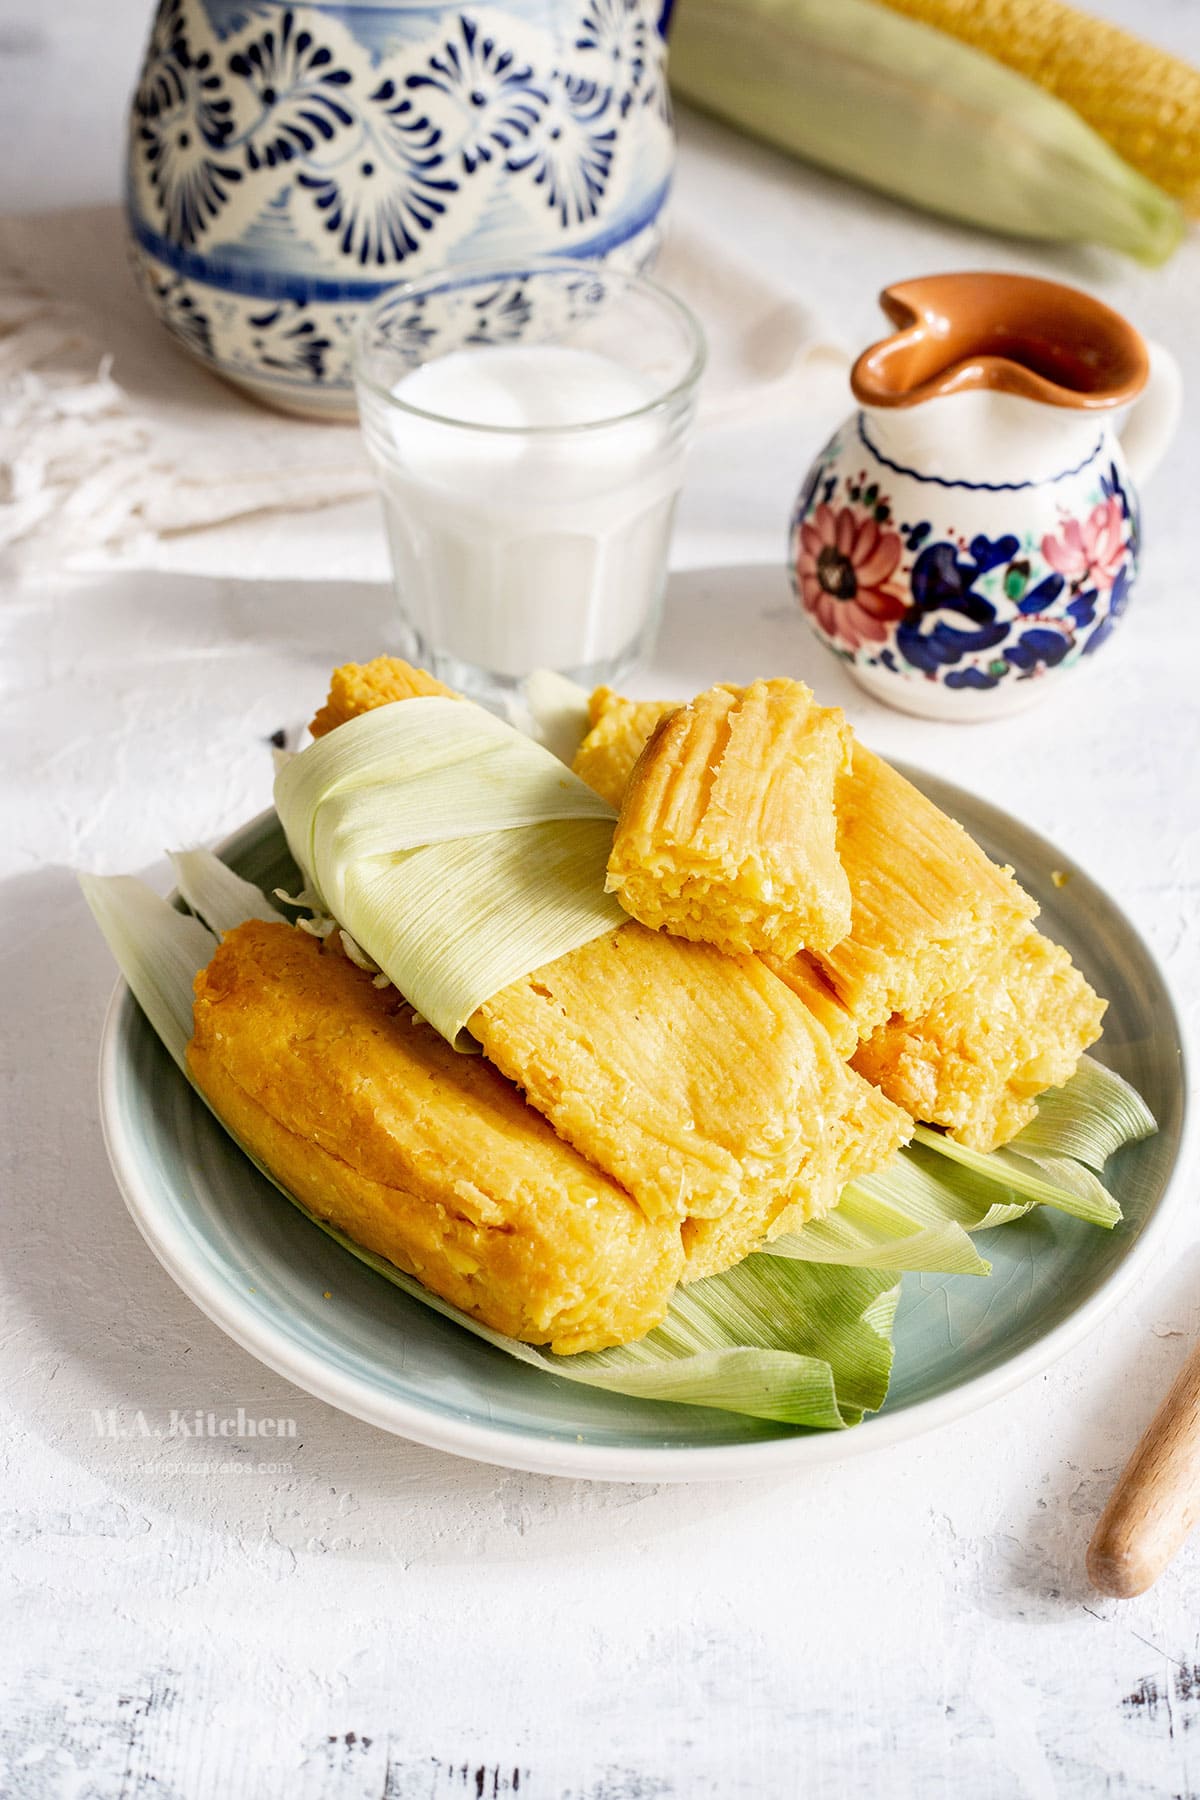 Sweet corn tamales de elote in a plate, unwrapped, and with a mug of coffee on the background.